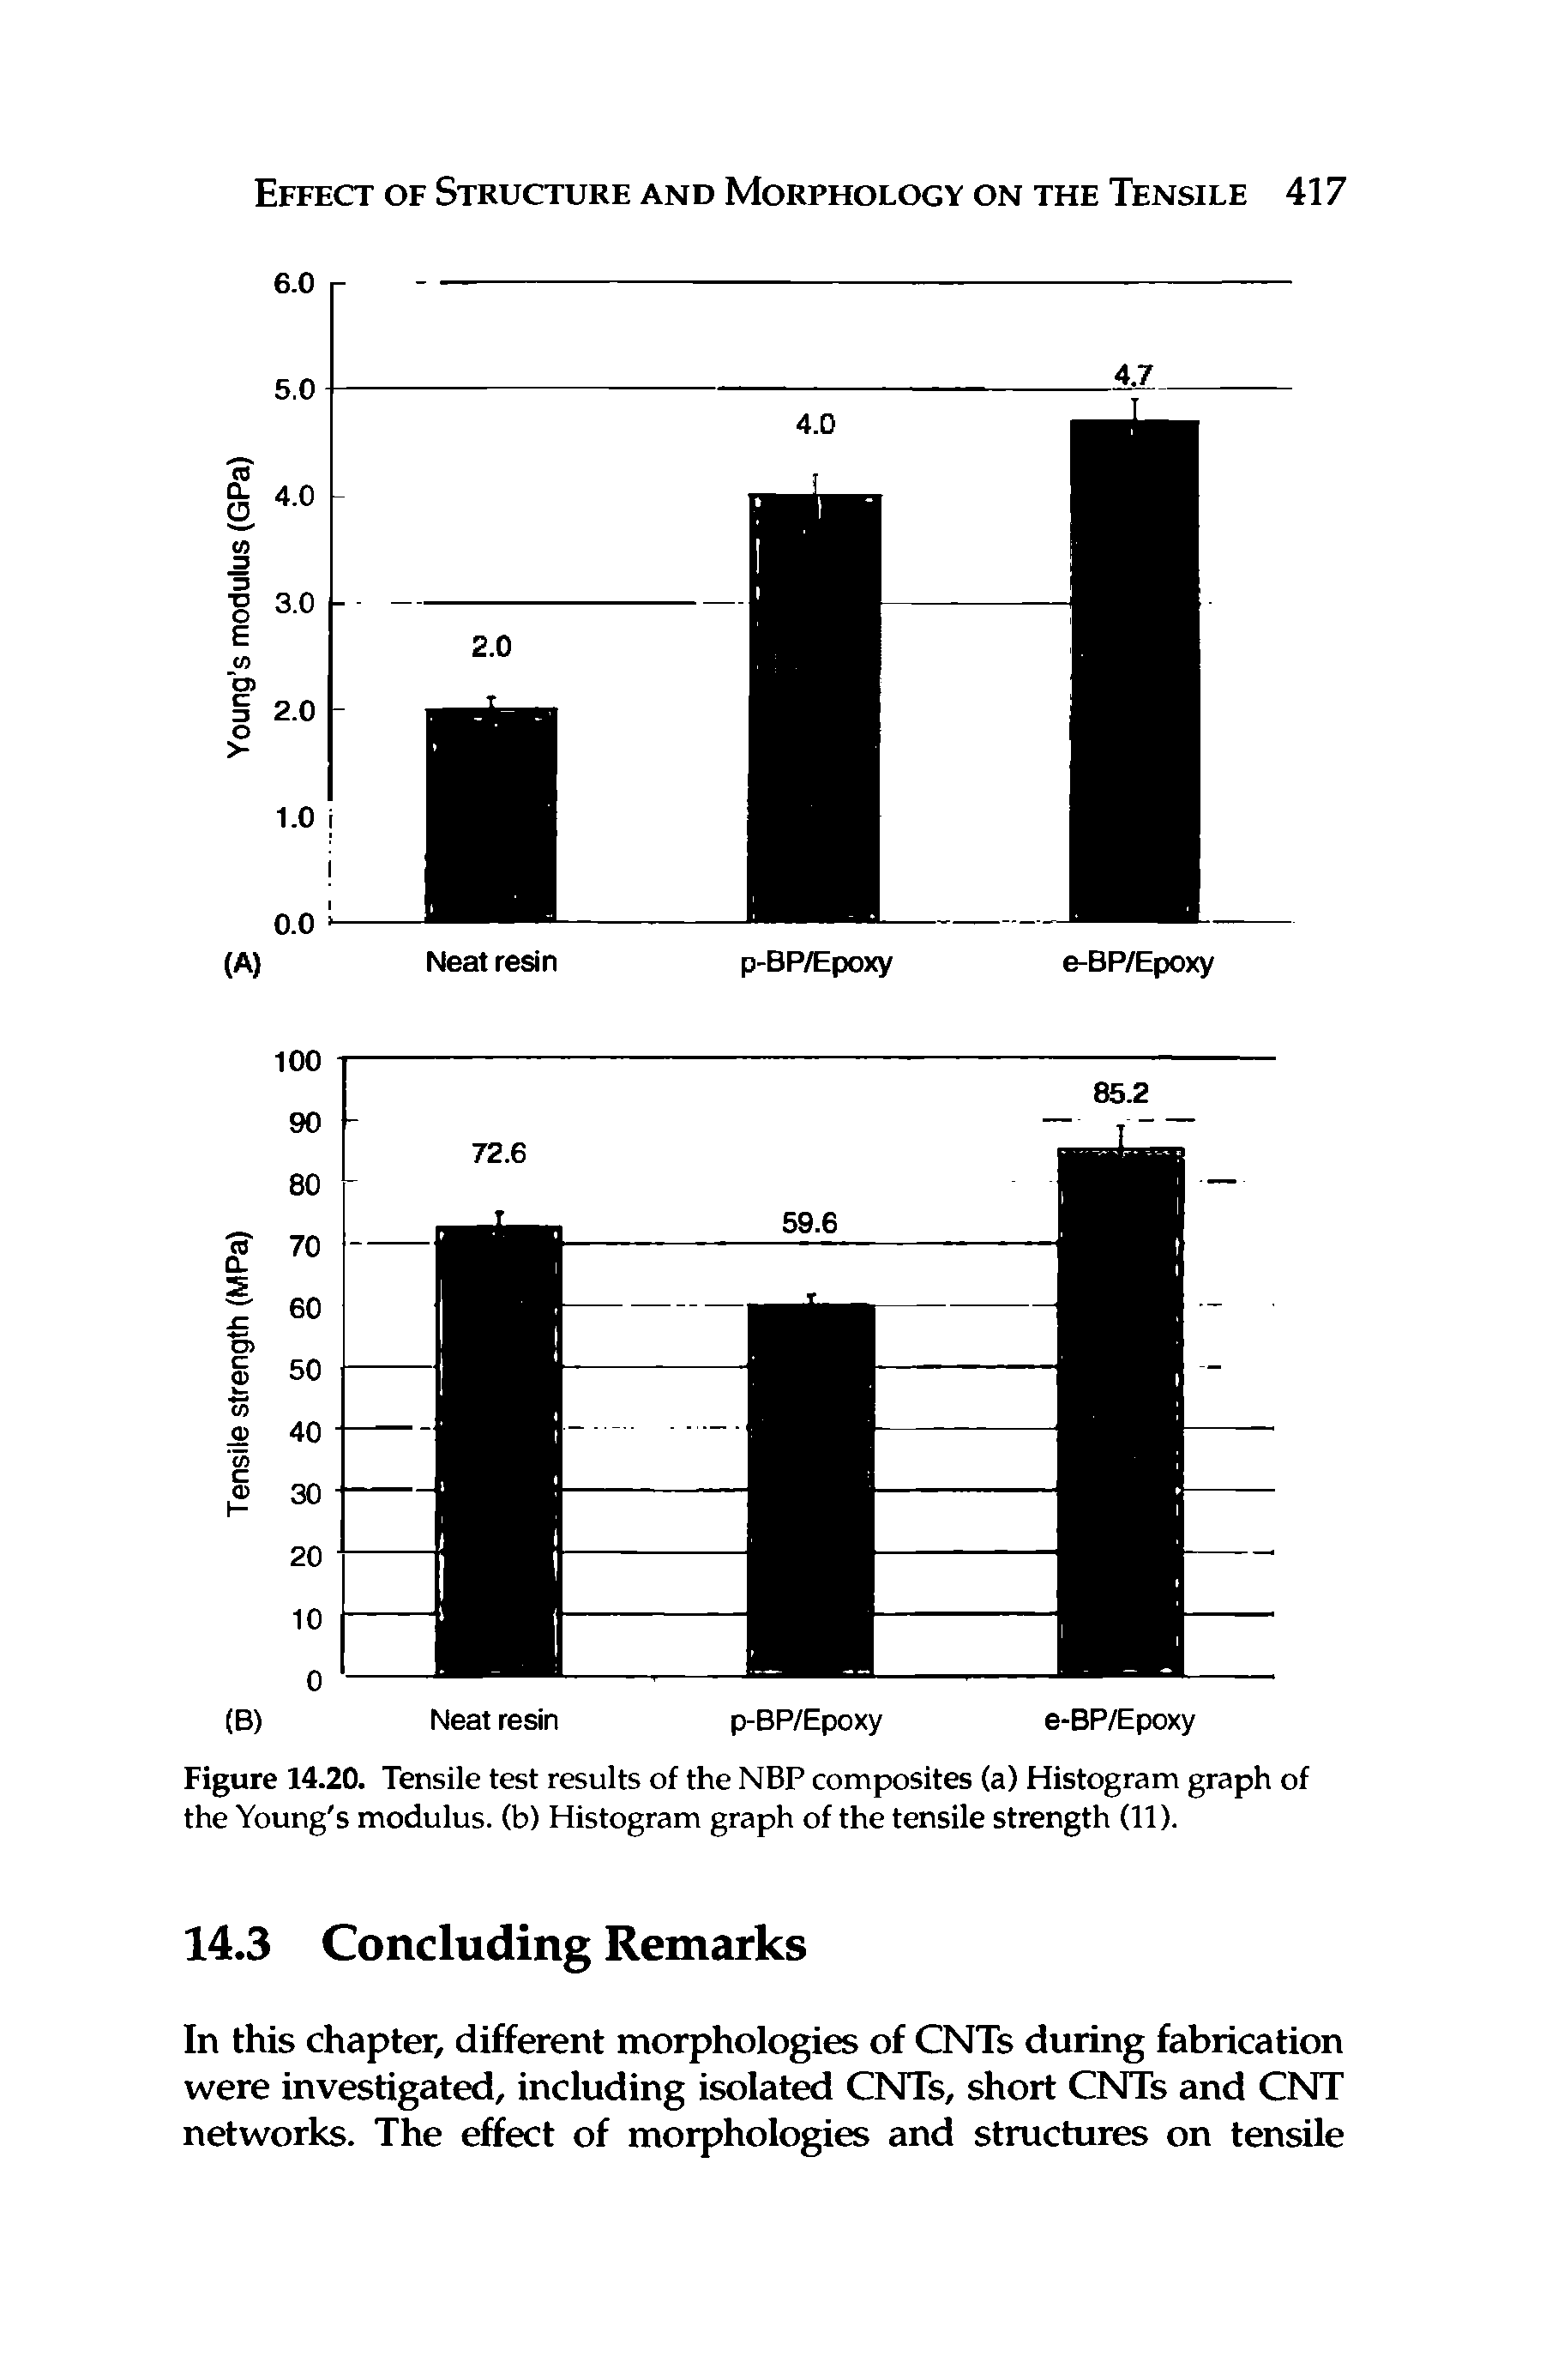 Figure 14.20. Tensile test results of the NBP composites (a) Histogram graph of the Young s modulus, (b) Histogram graph of the tensile strength (11).